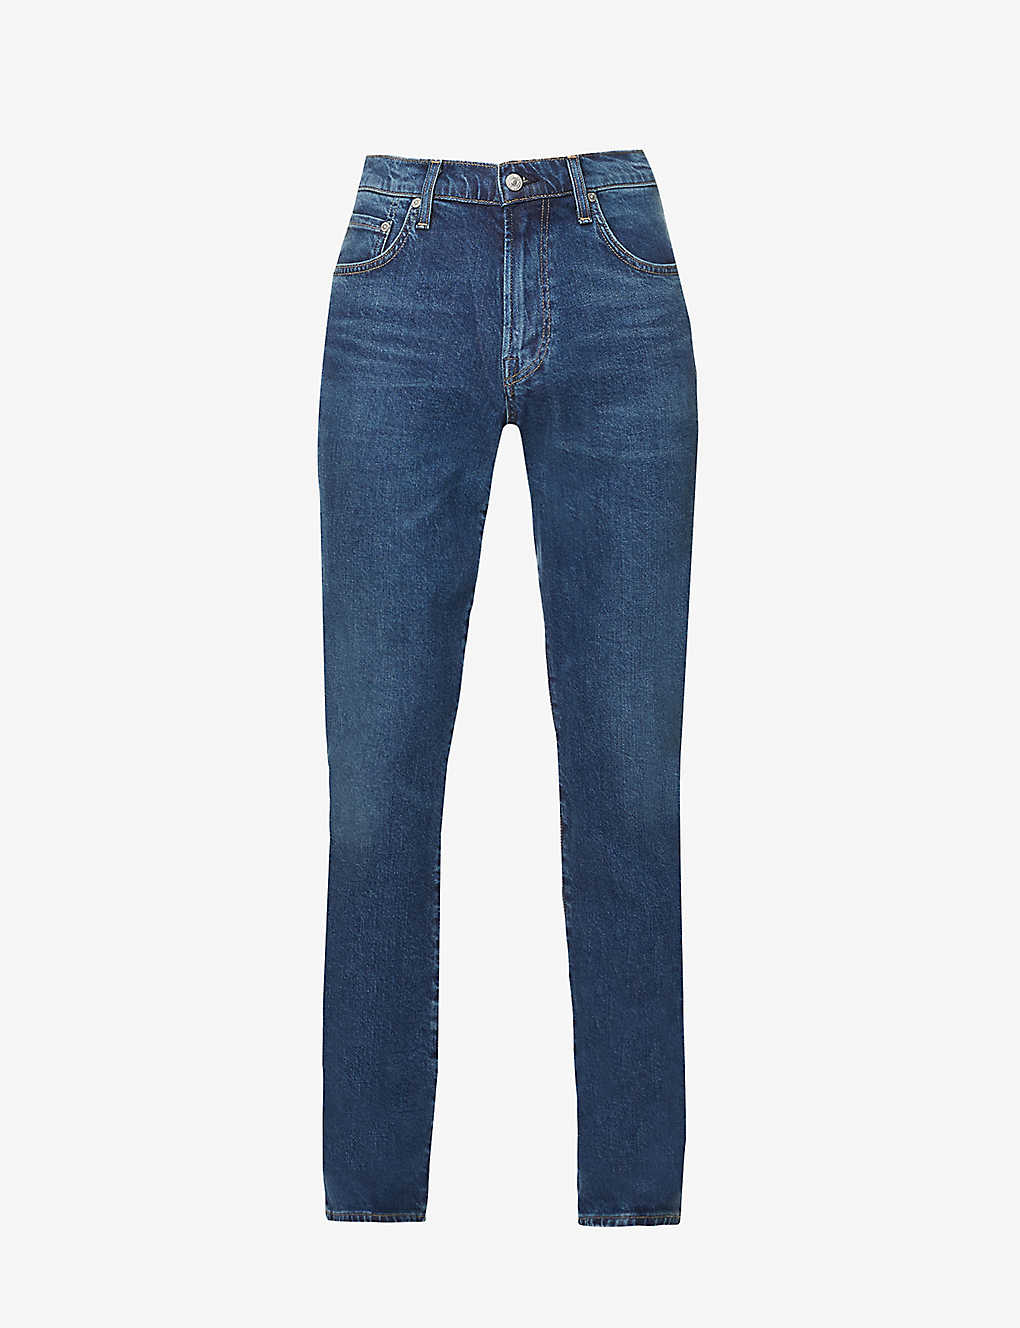 Citizens Of Humanity London Slim-leg Jeans In All Roads